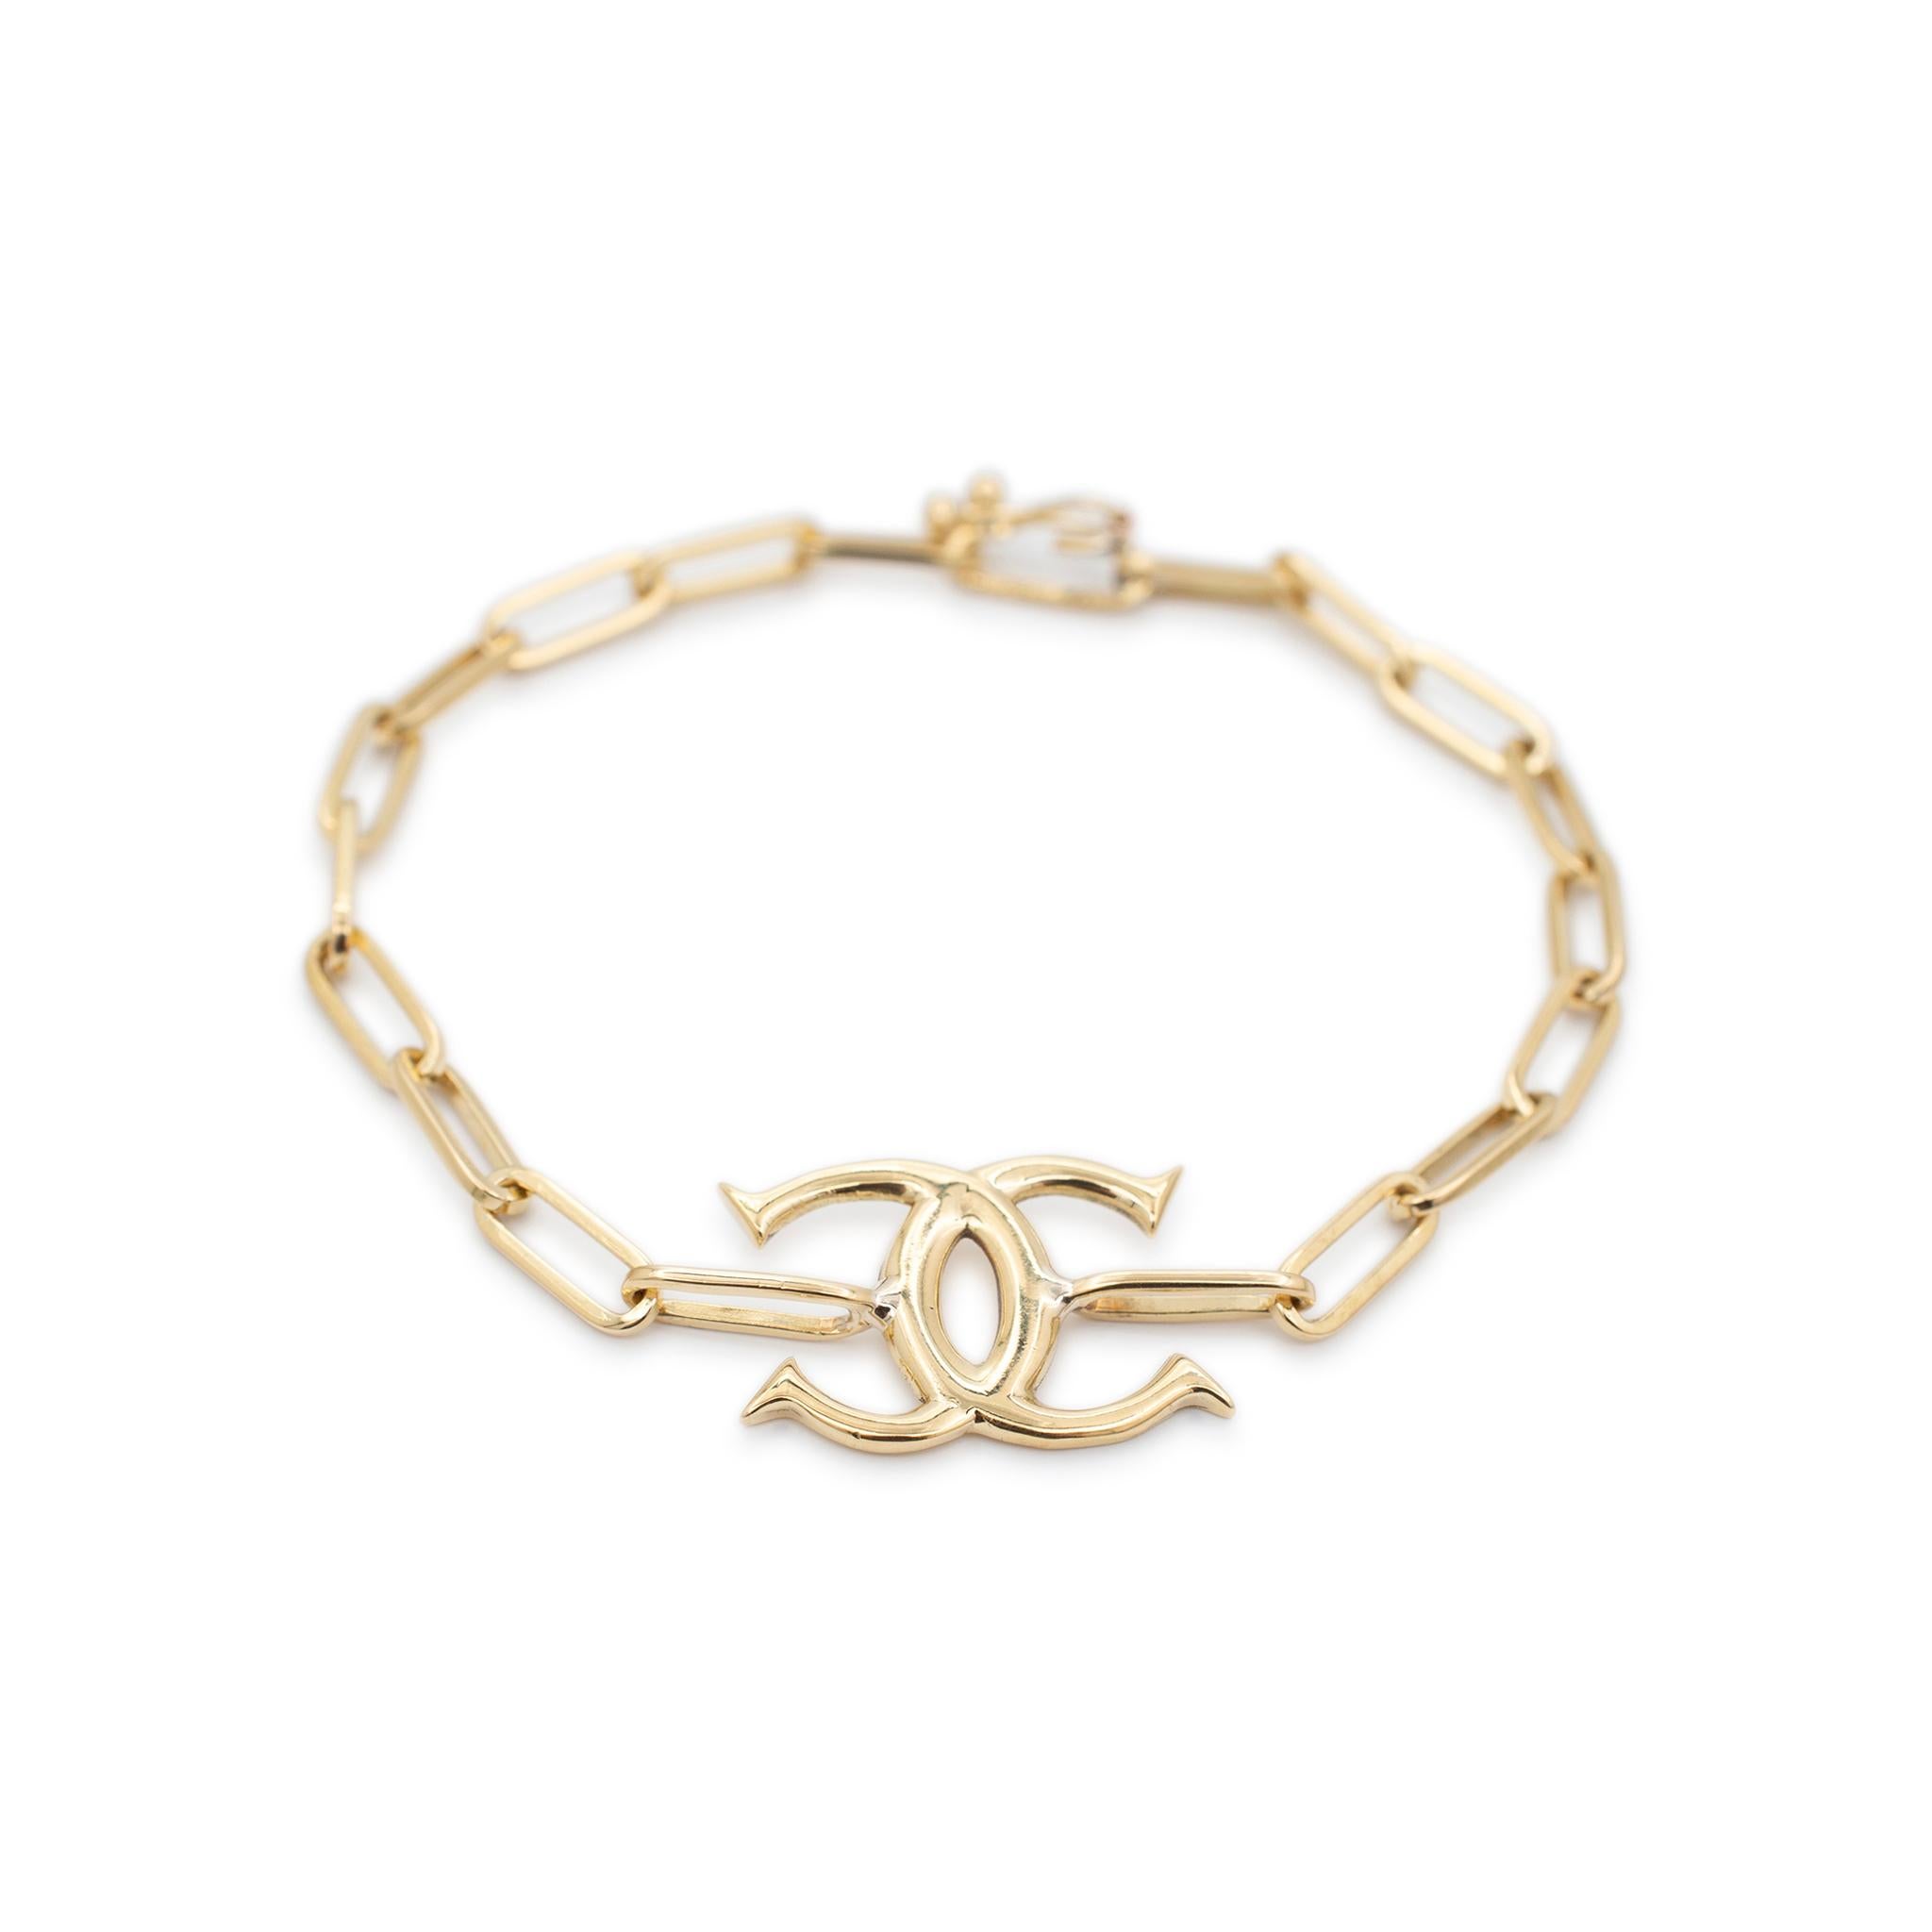 Brand: Cartier

Gender: Unisex

Metal Type: 18K Yellow Gold

Length: 6.75 Inches

Pendant measurements: 12.55mm x 20.85mm

Chain width: 4.00 mm

Weight: 8.37 Grams

18K yellow gold vintage link bracelet. The metal was tested and determined to be 18K